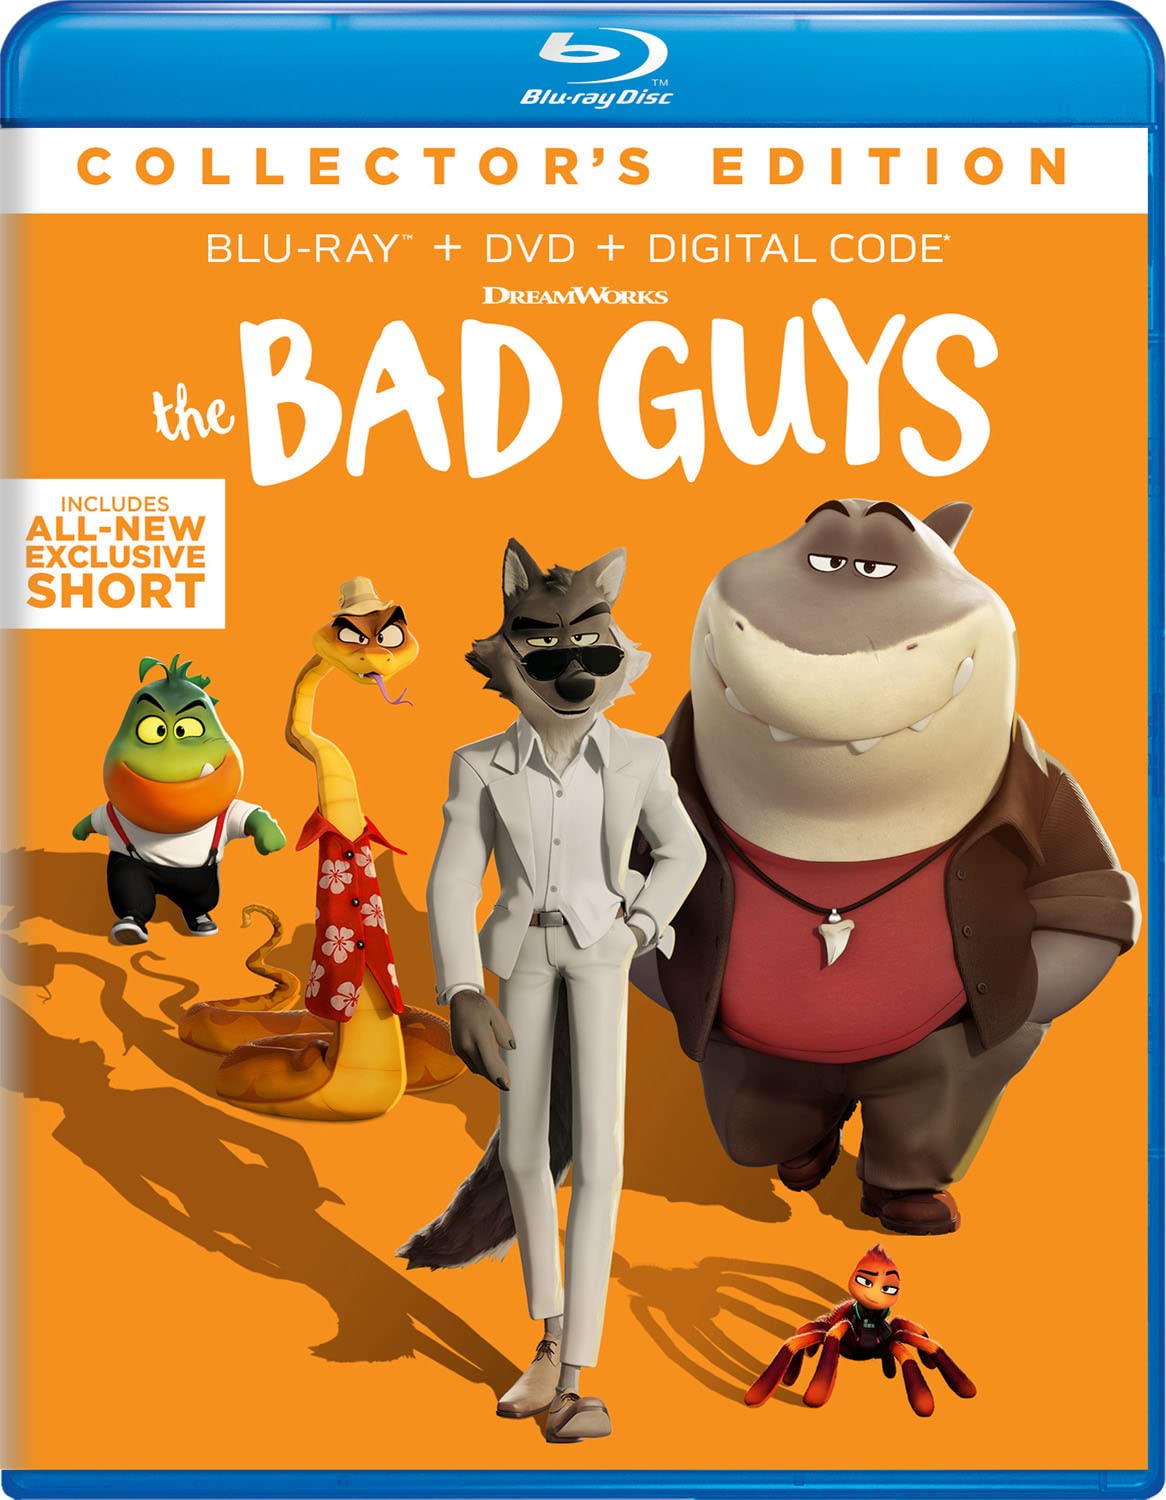 The Bad Guys movie available to own 6/21/22